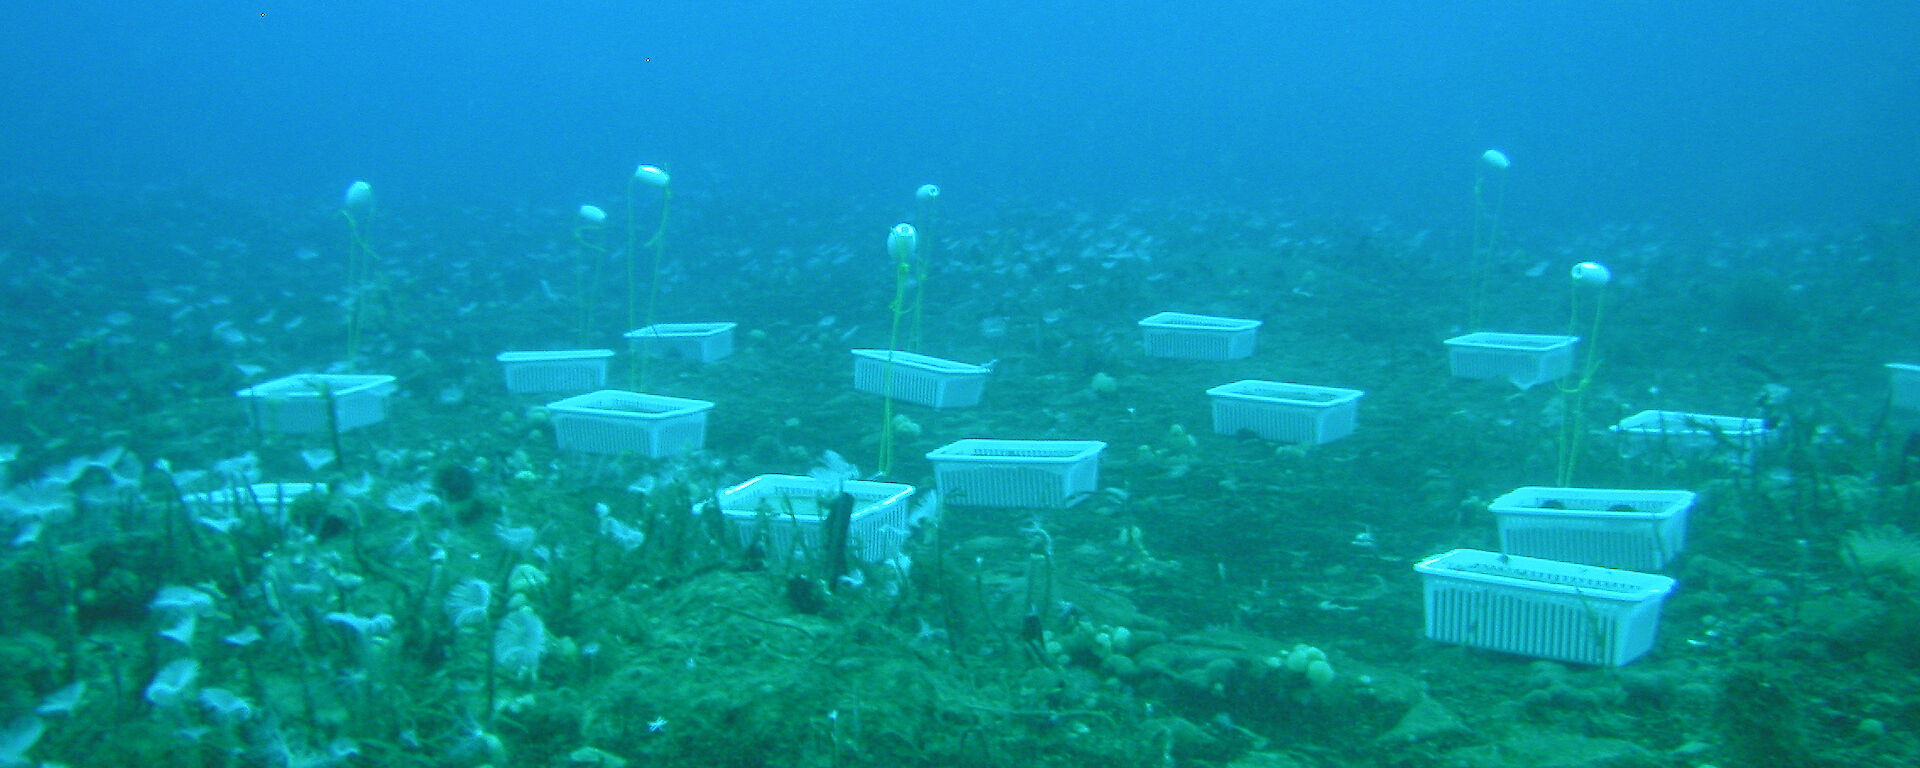 Trays filled with sediment contaminated by different hydrocarbons on the seabed in O’Brien Bay, near Casey research station.